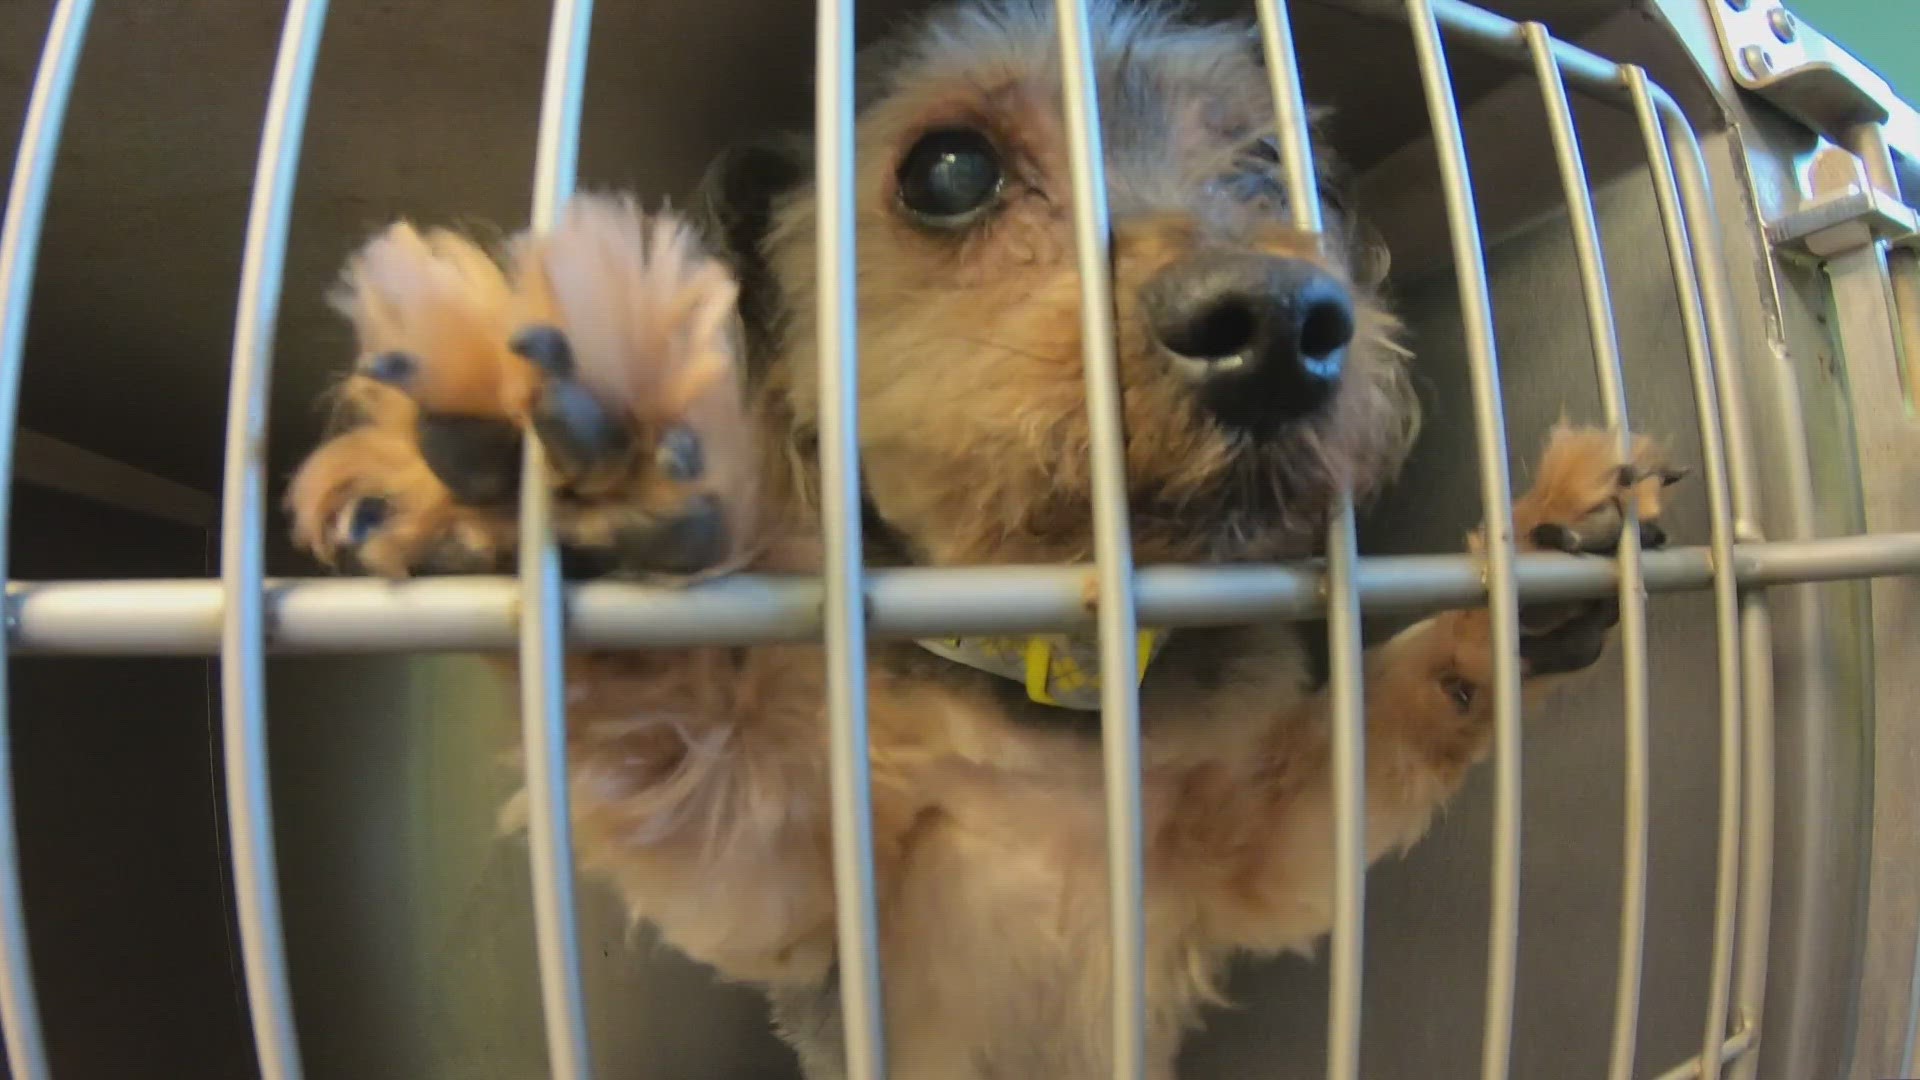 Pet rescues across New Orleans are pleading with the city to step up and help with the staggering number of pets being surrendered.